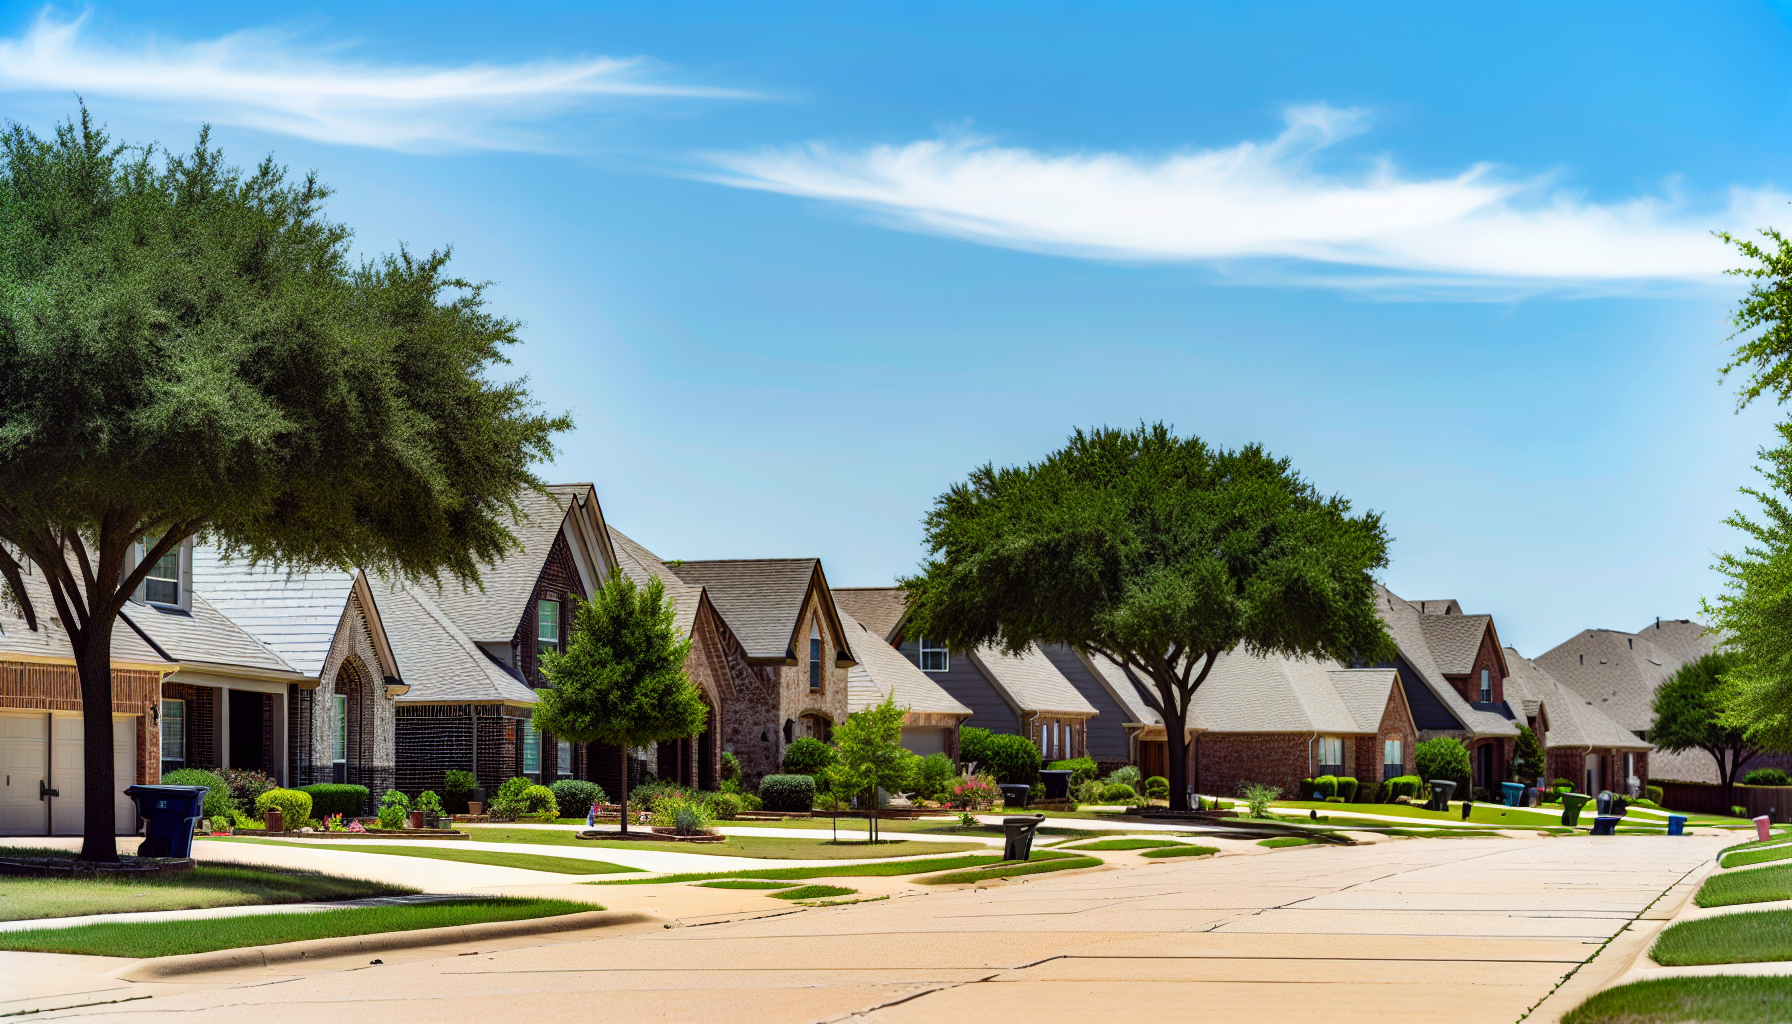 Suburban neighborhood in Texas with low property taxes and affordable rates